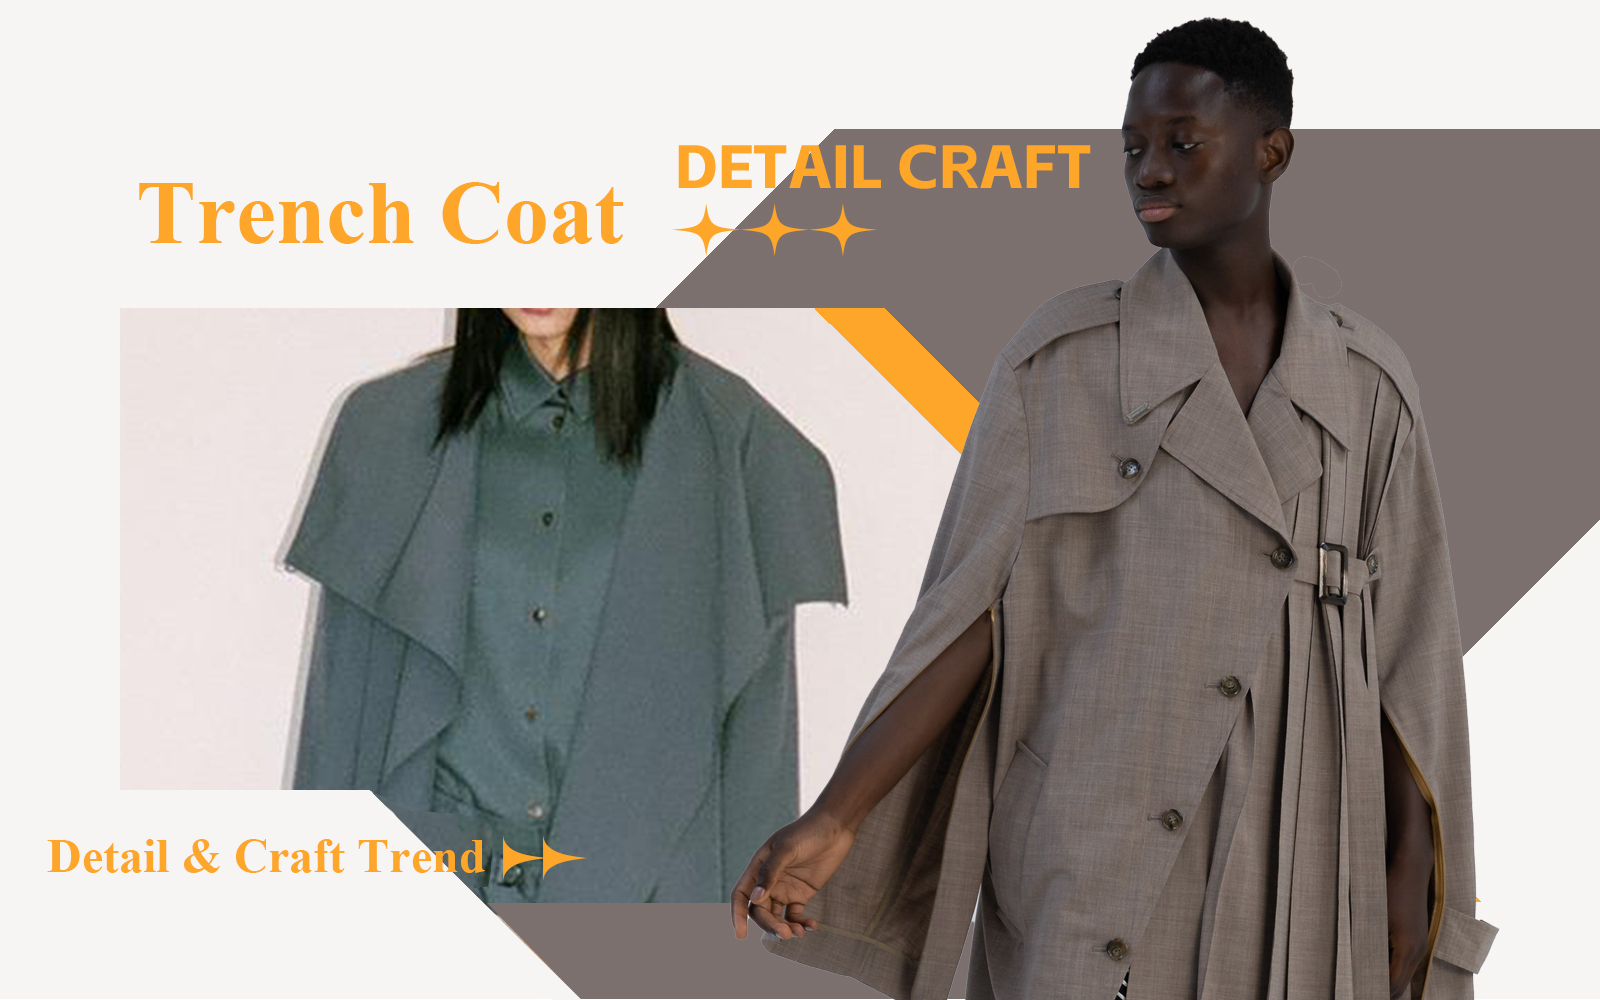 The Detail & Craft Trend for Women's Trench Coat